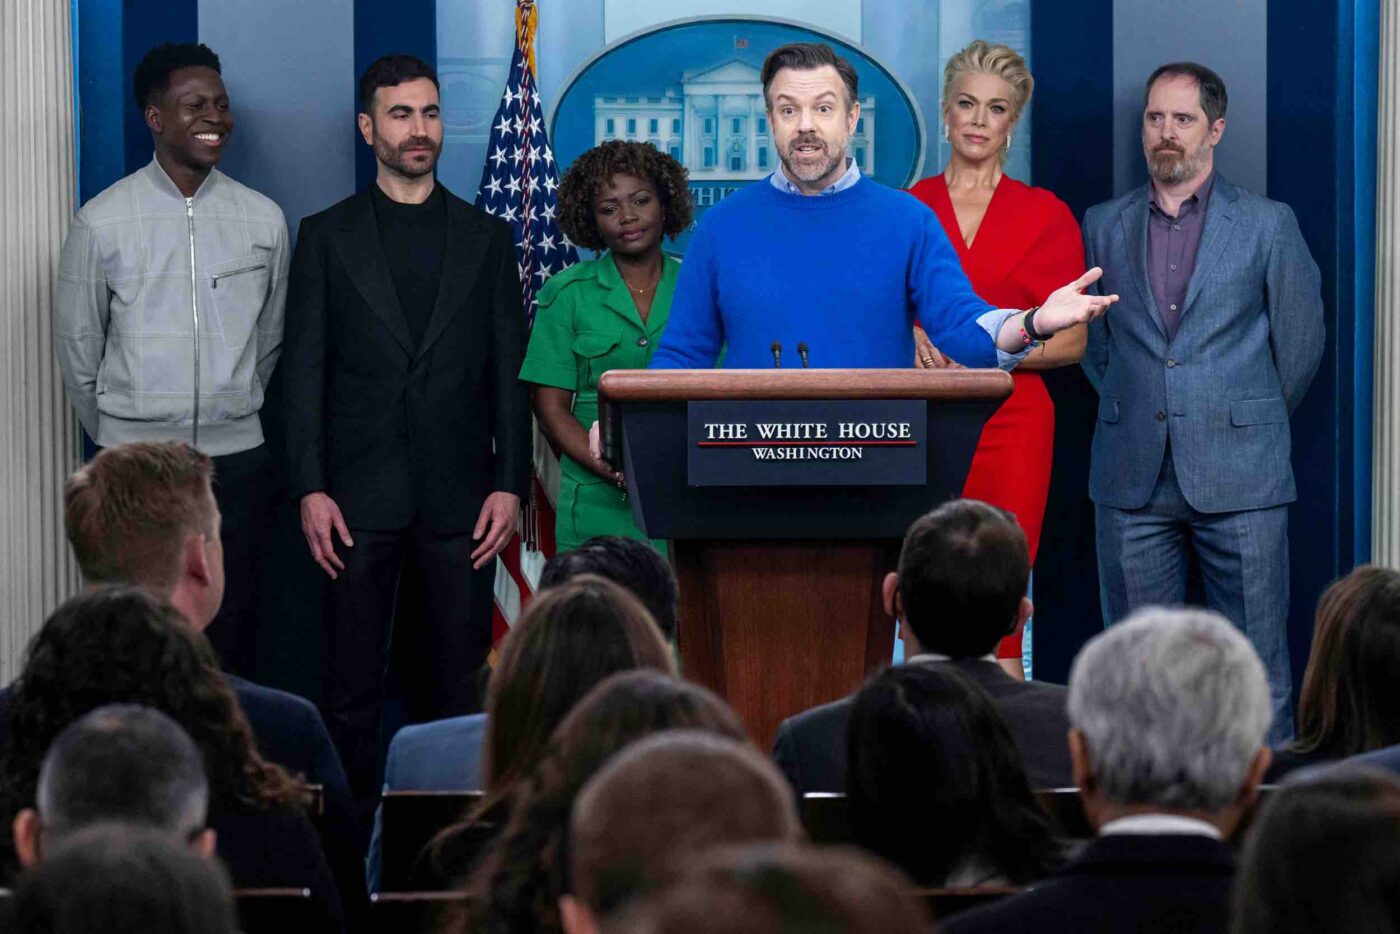 The White House in Washington, Ted Lasso speaking